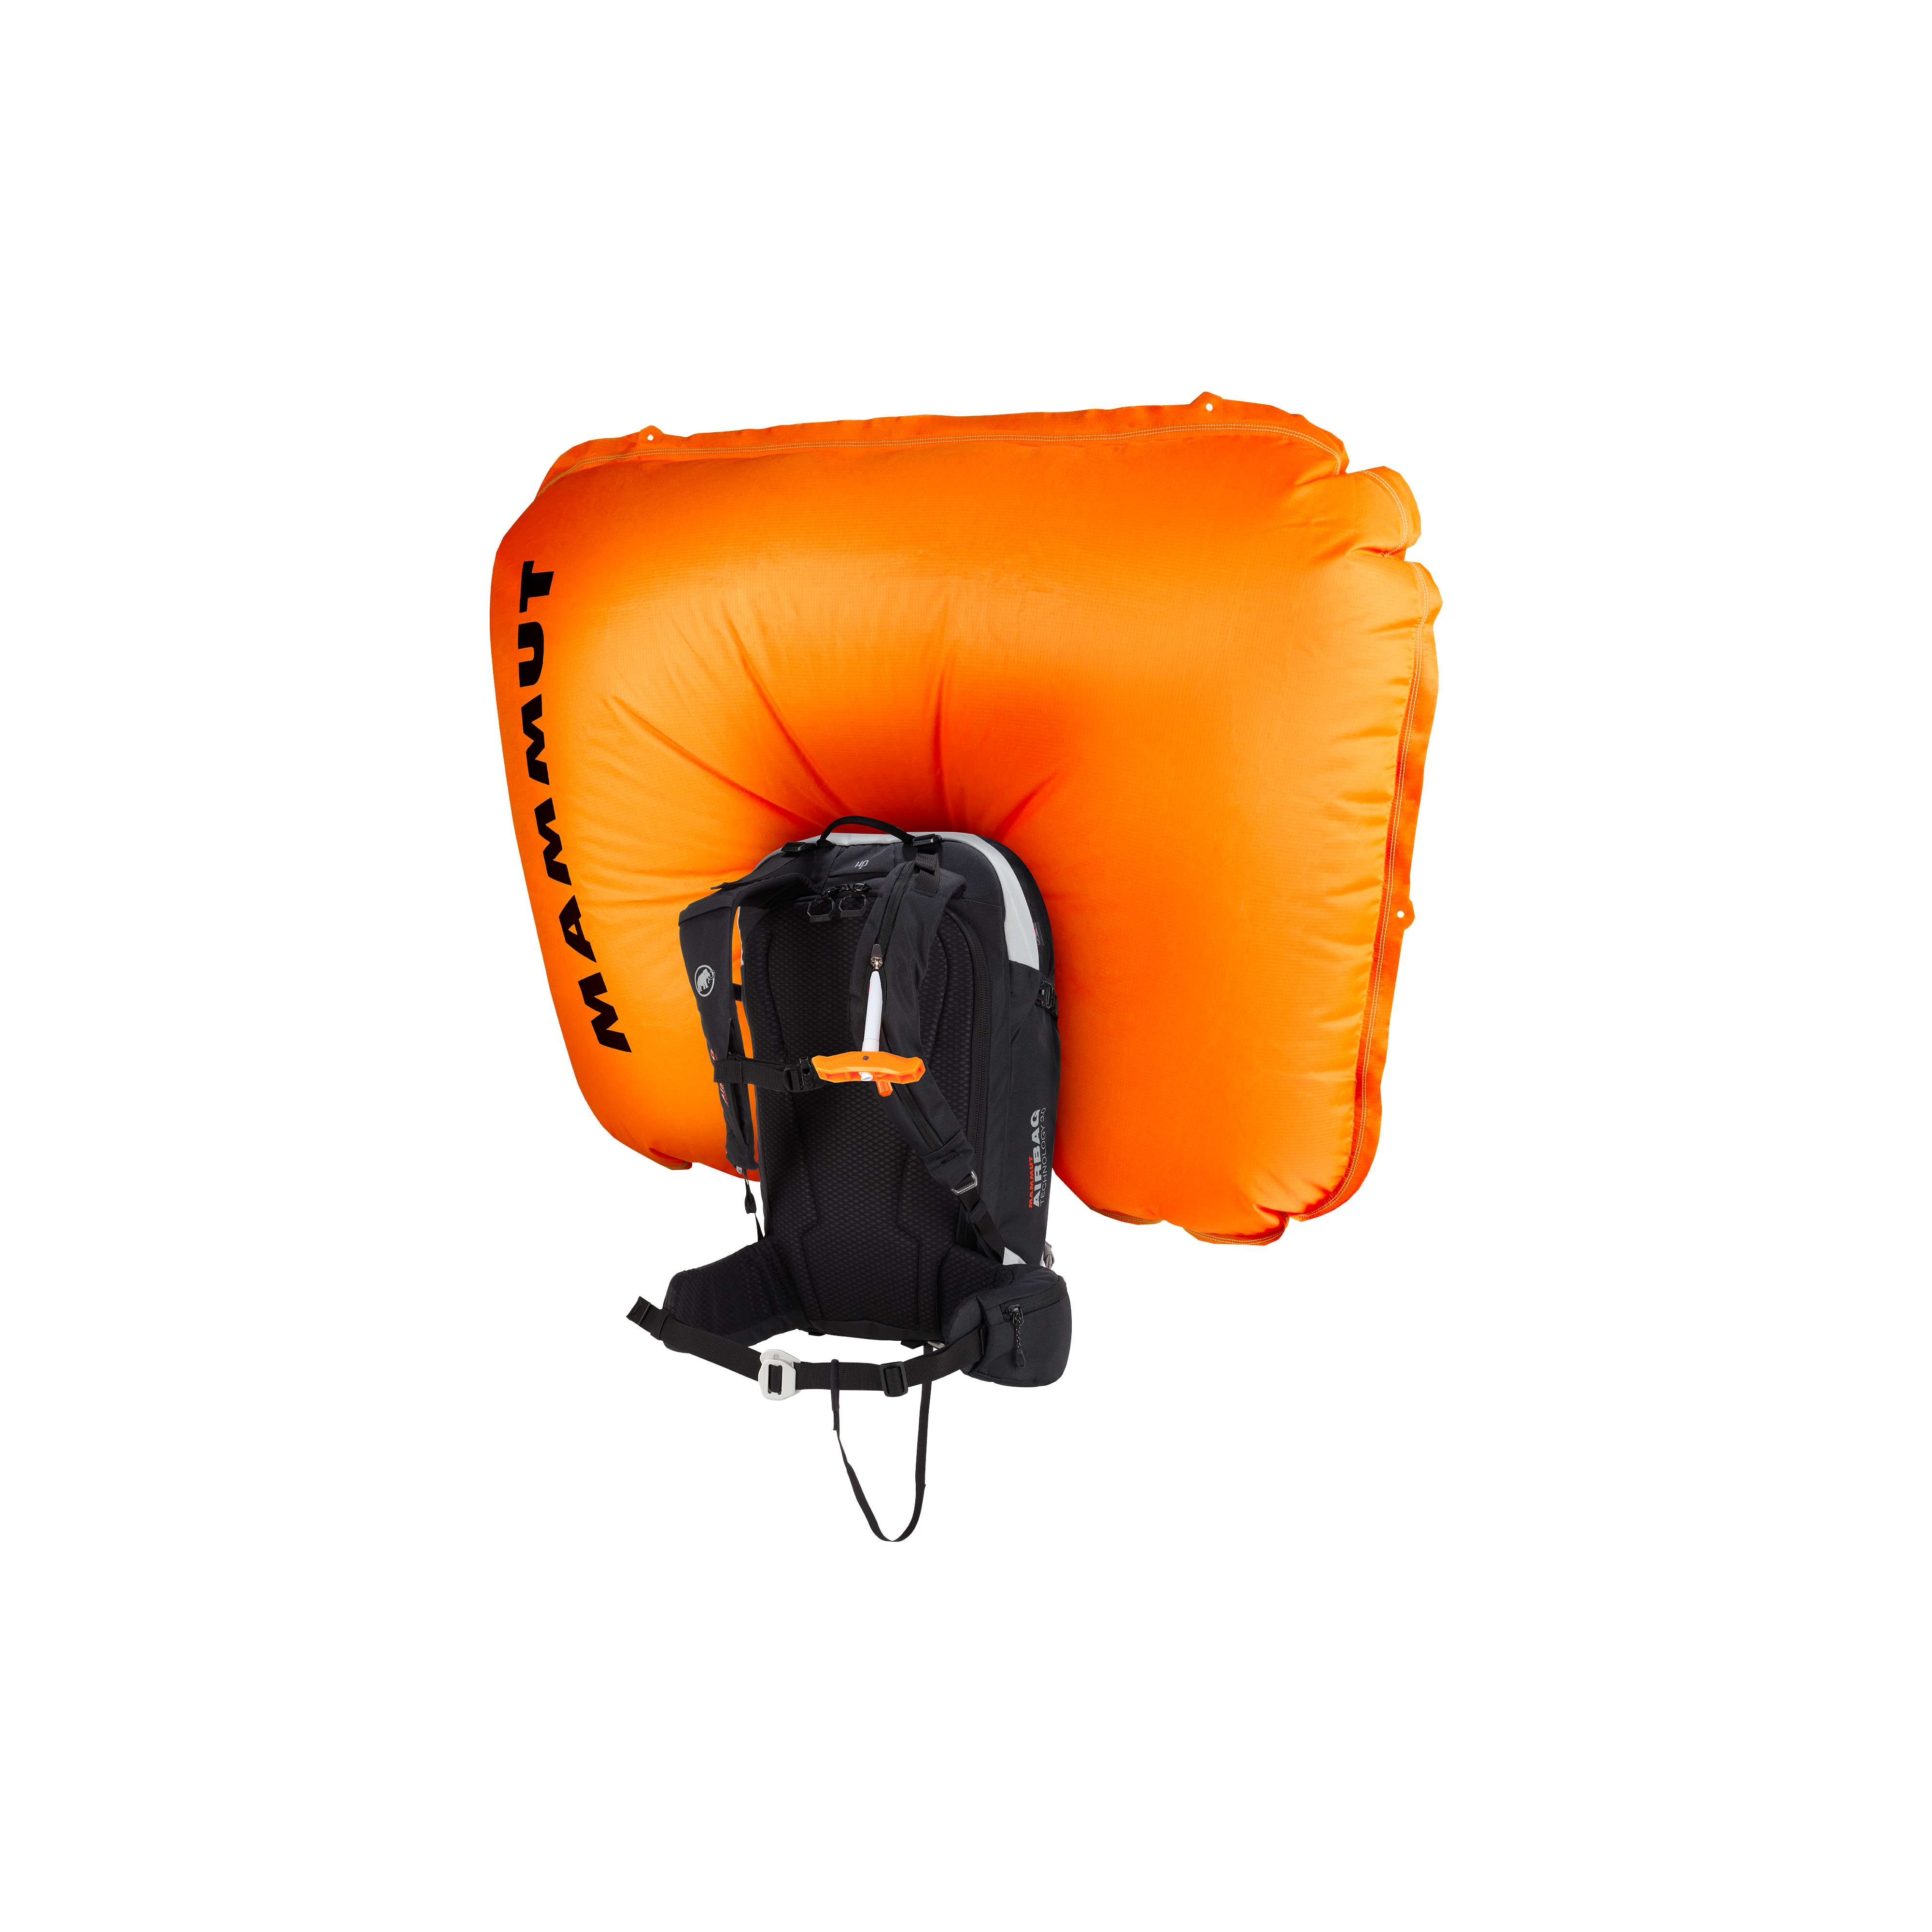 Pro X Removable Airbag 3.0